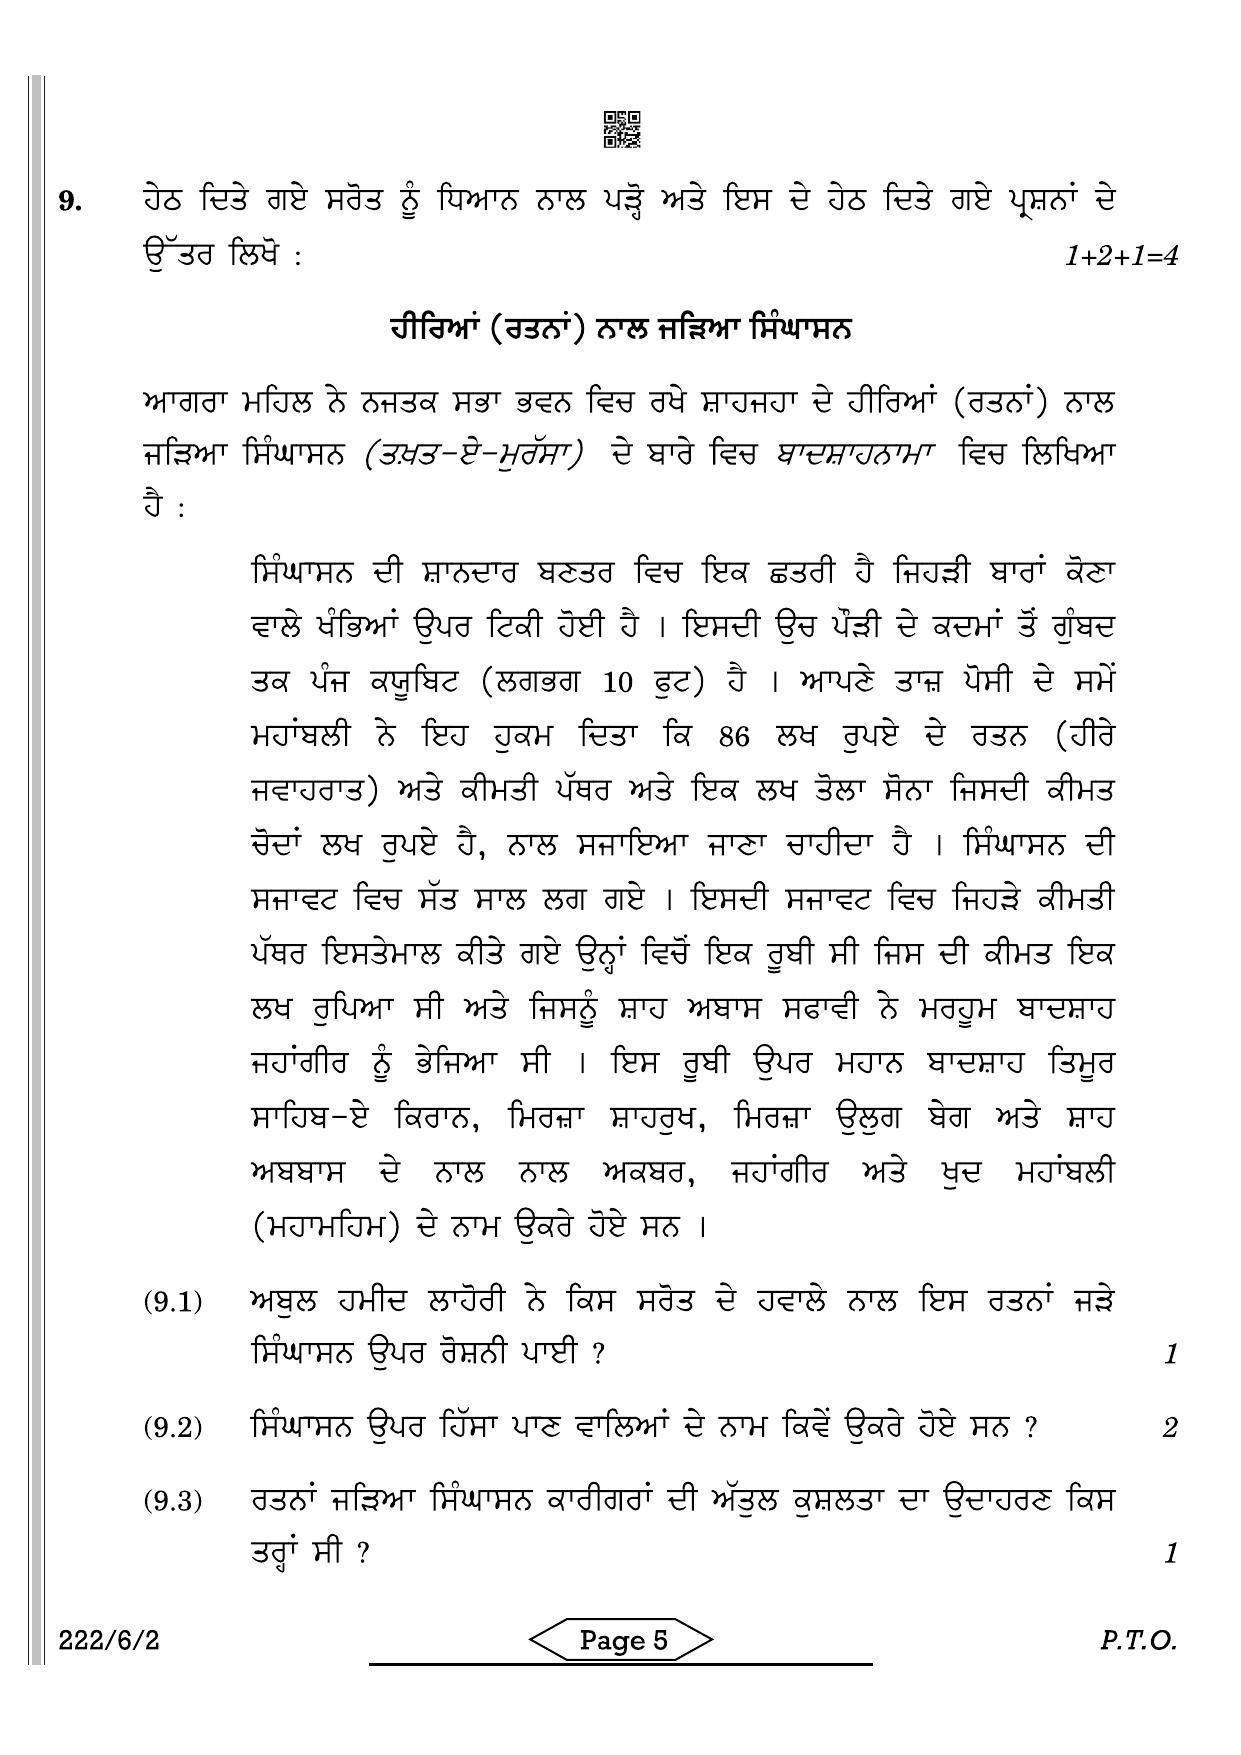 CBSE Class 12 222-6-2 History Punjabi 2022 Compartment Question Paper - Page 5